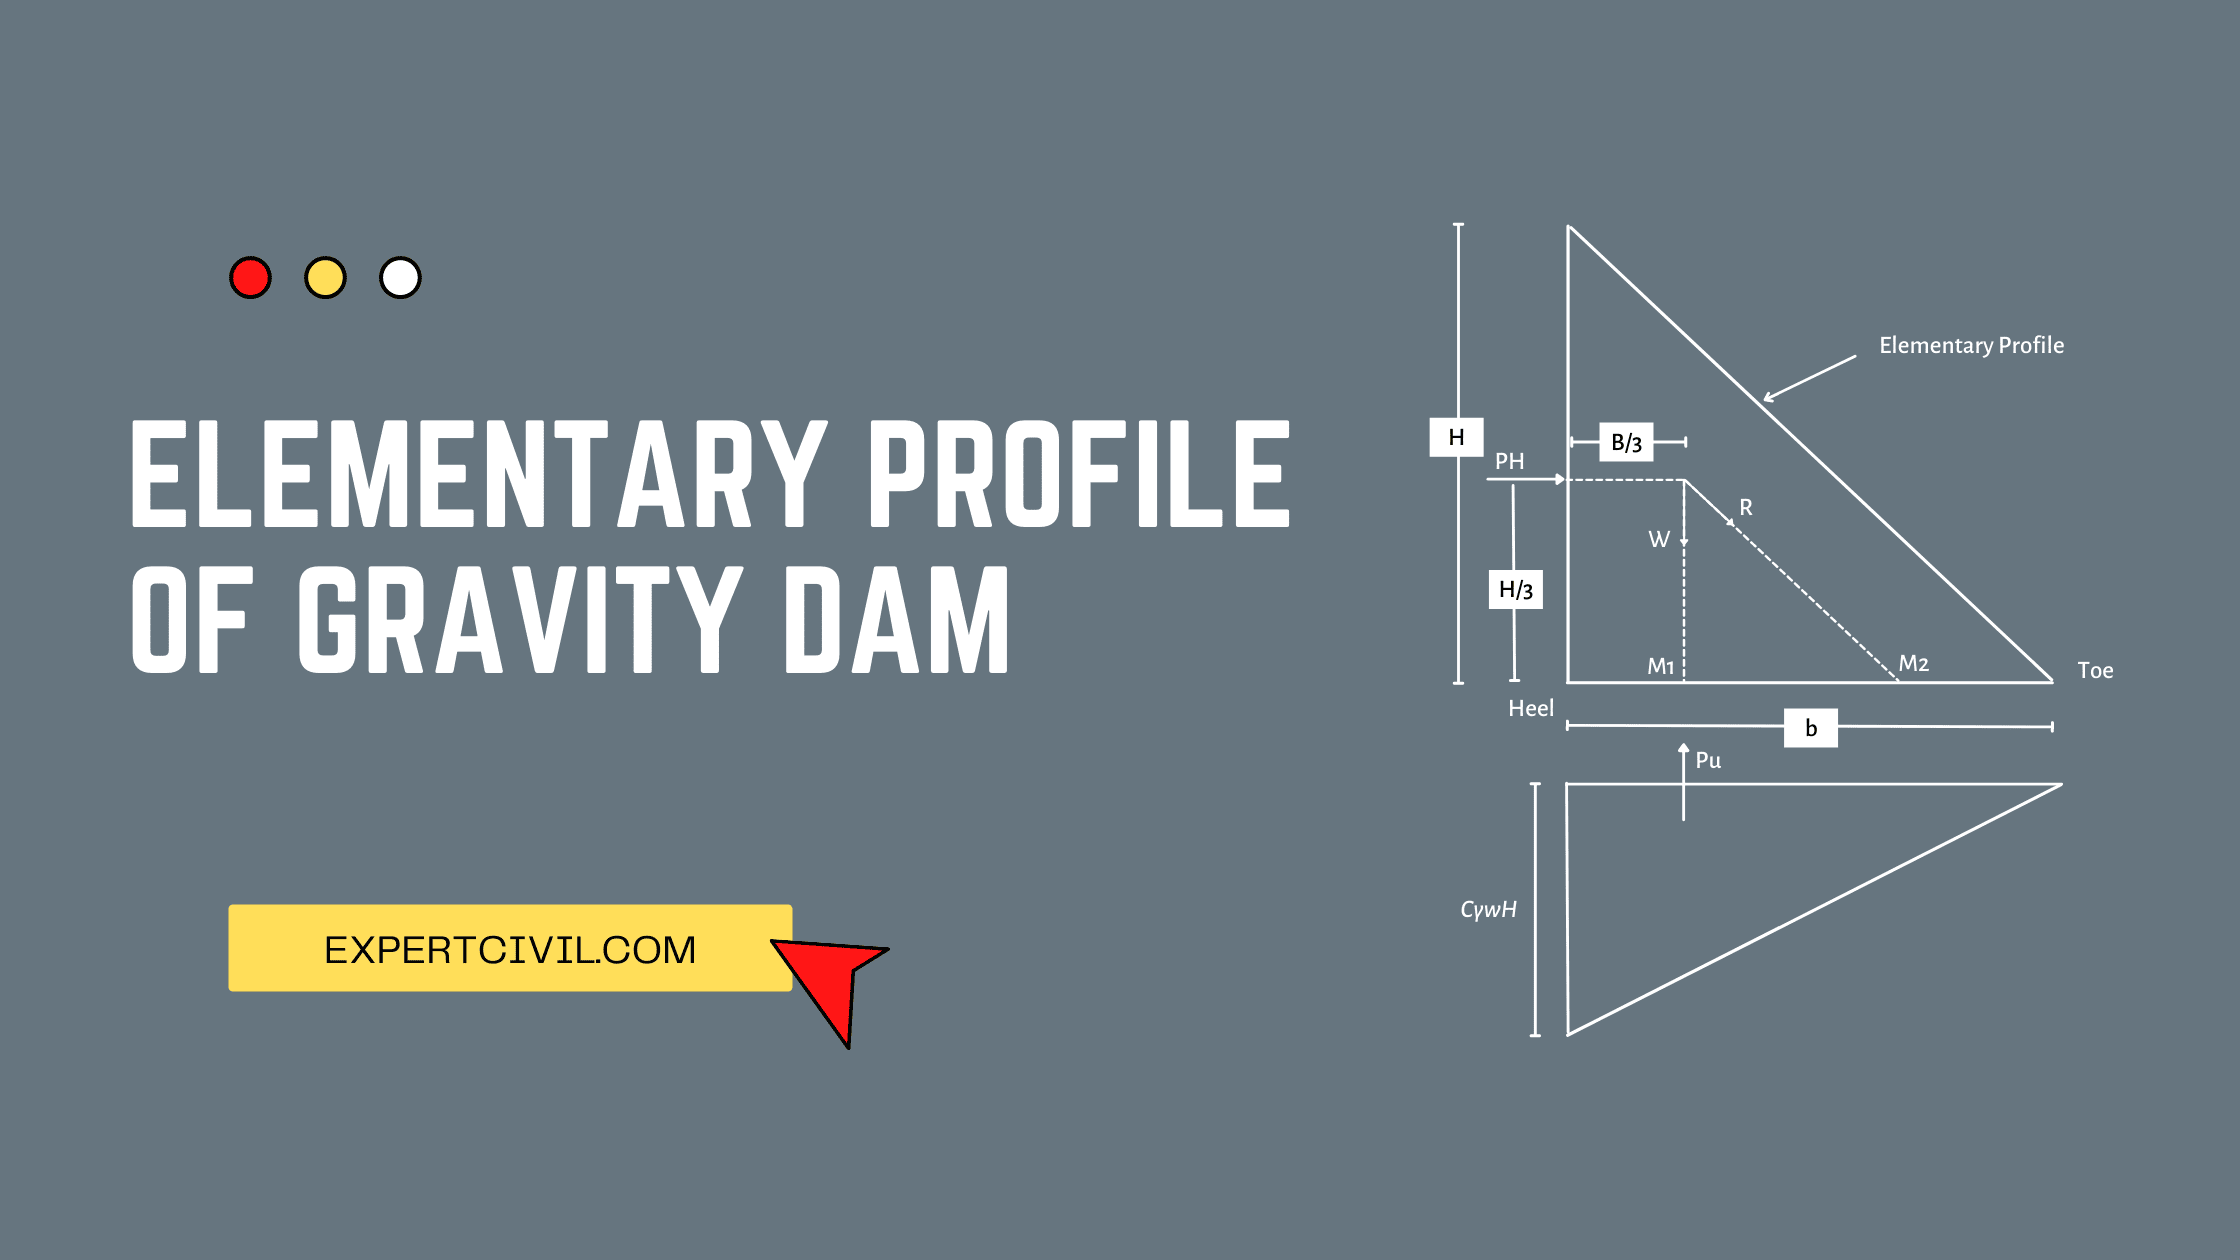 Elementary Profile of Gravity Dam | Difference Between Elementary and Practical Profile